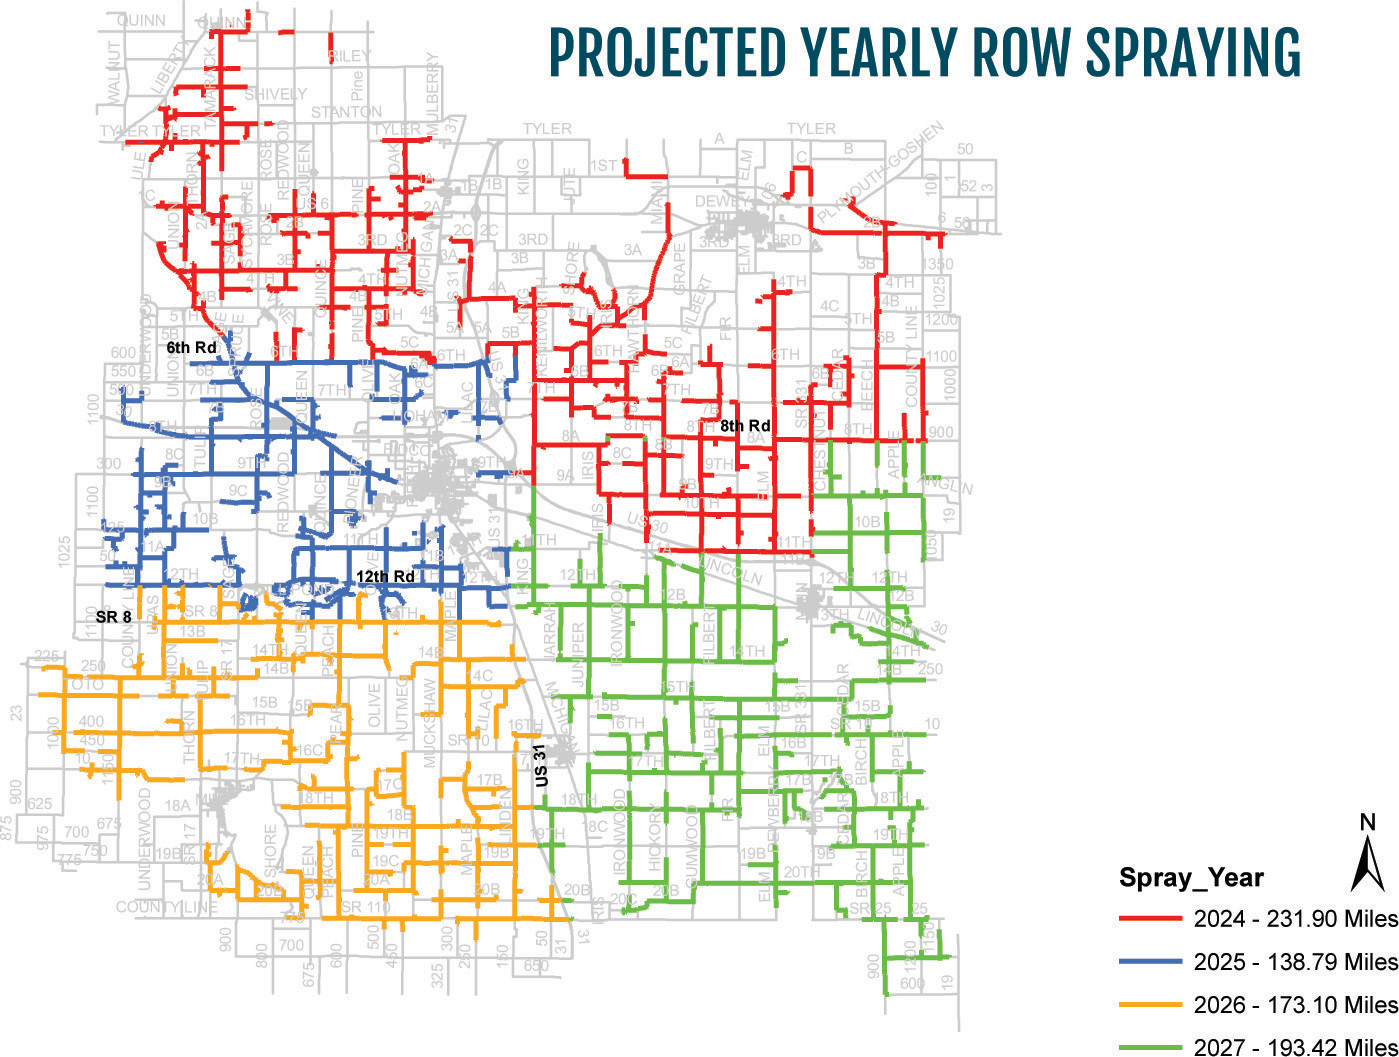 Projected yearly row spraying